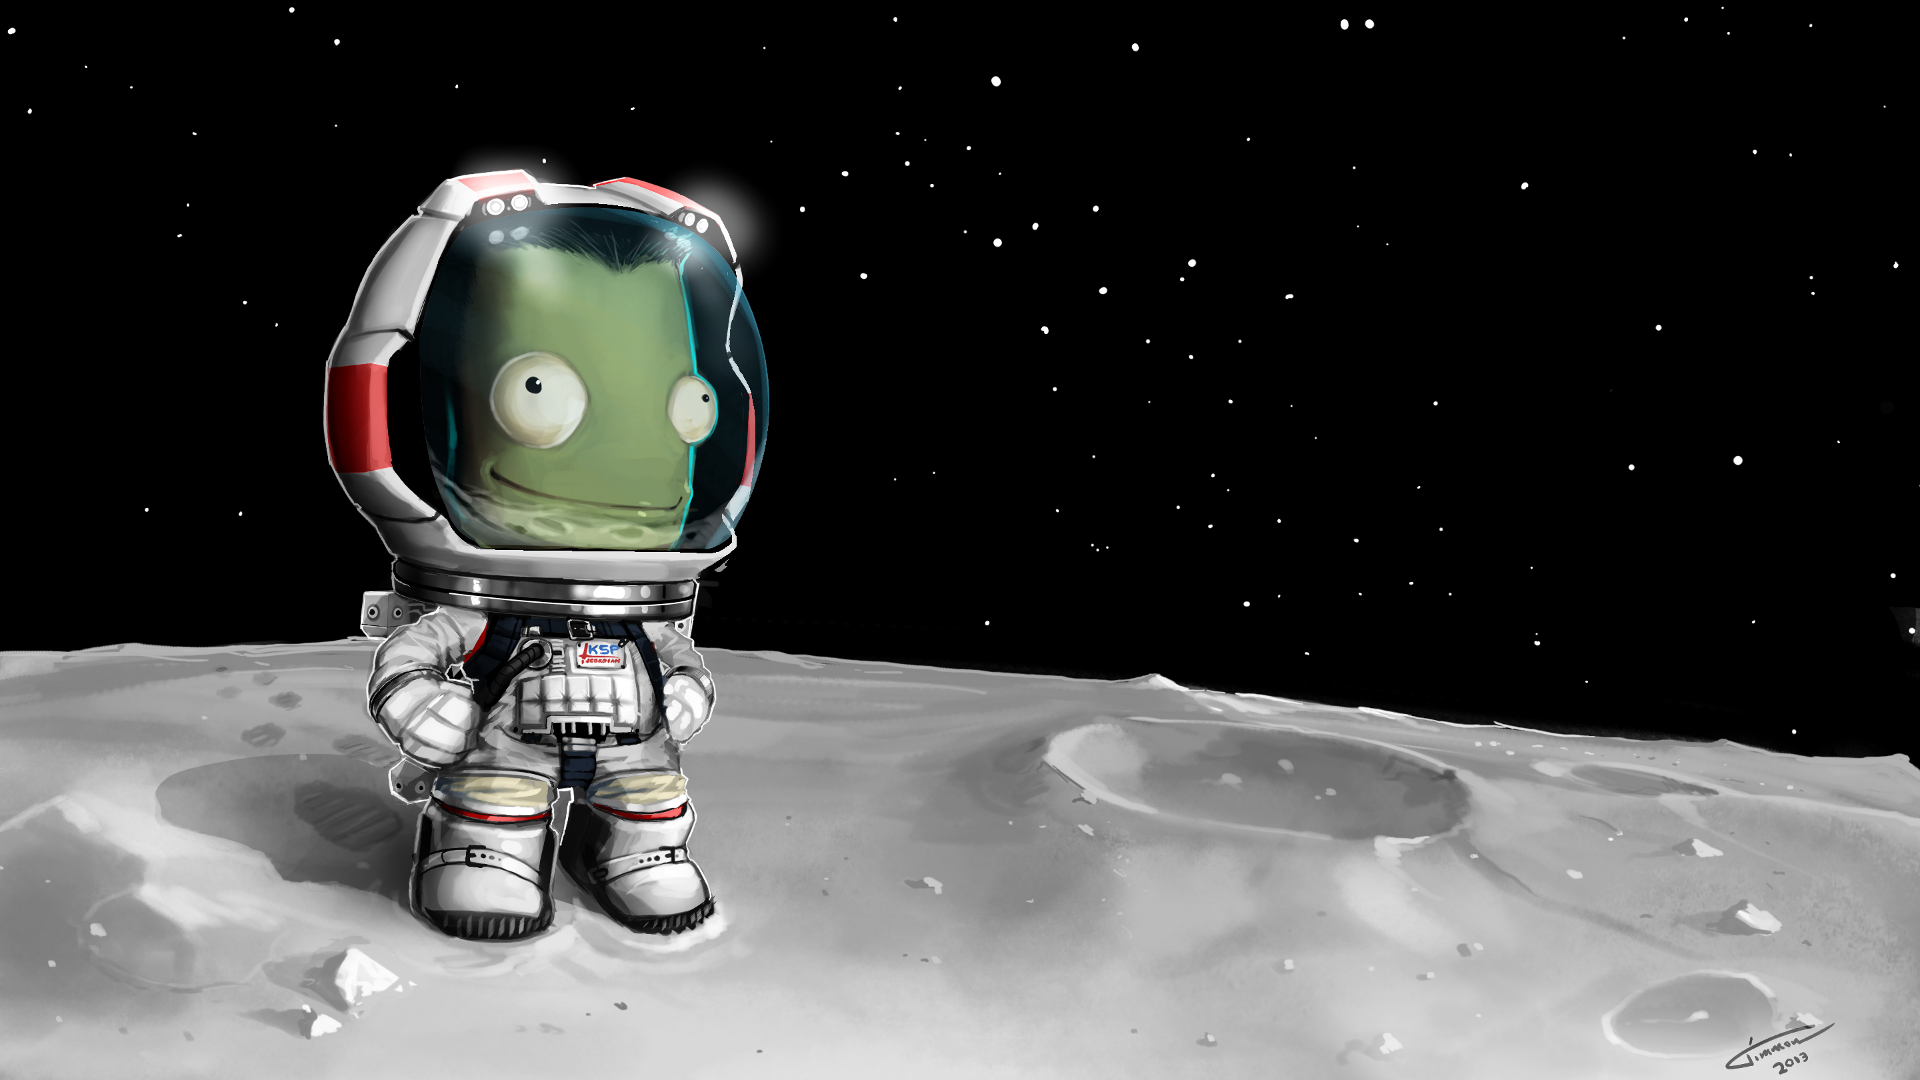 Kerbal Space Program HD Wallpaper And Background Image